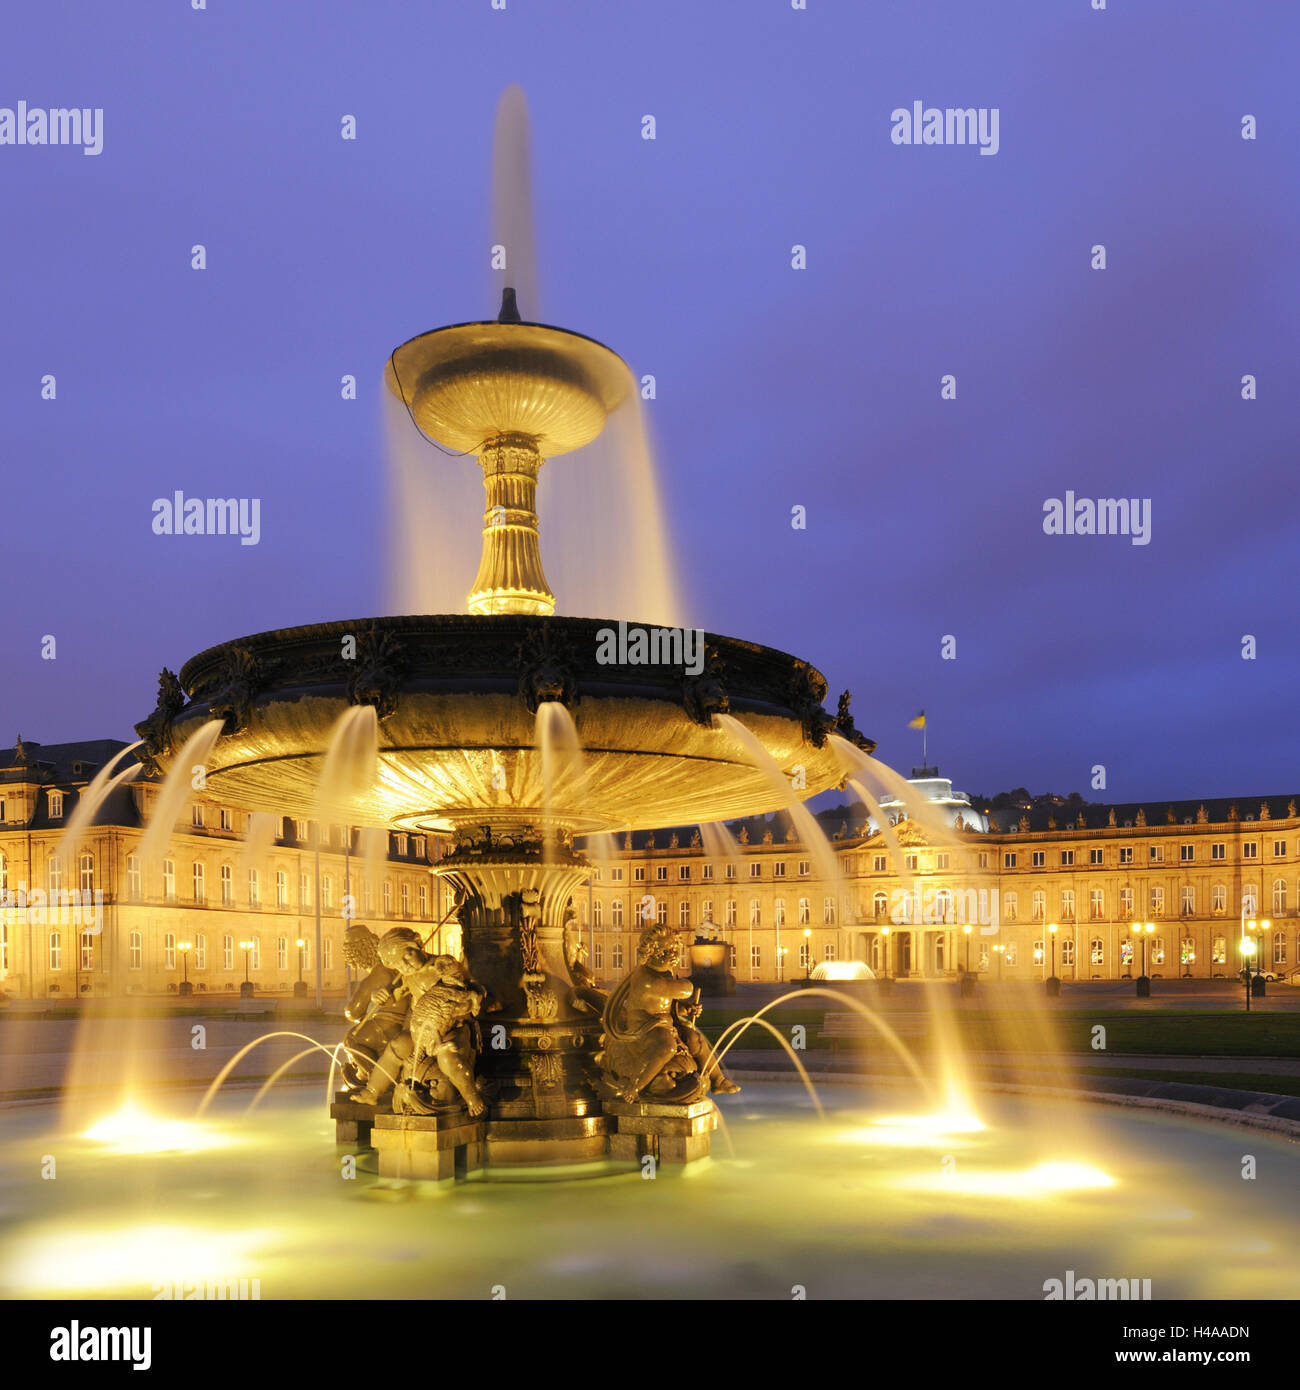 Germany, Baden-Wurttemberg, Stuttgart, new castle, fountain, dusk, lighting, architecture, well, culture, castle square, play water, place of interest, tourism, structure, Pureline, castle building, building, forecourt, destination, water jets, nobody, lo Stock Photo